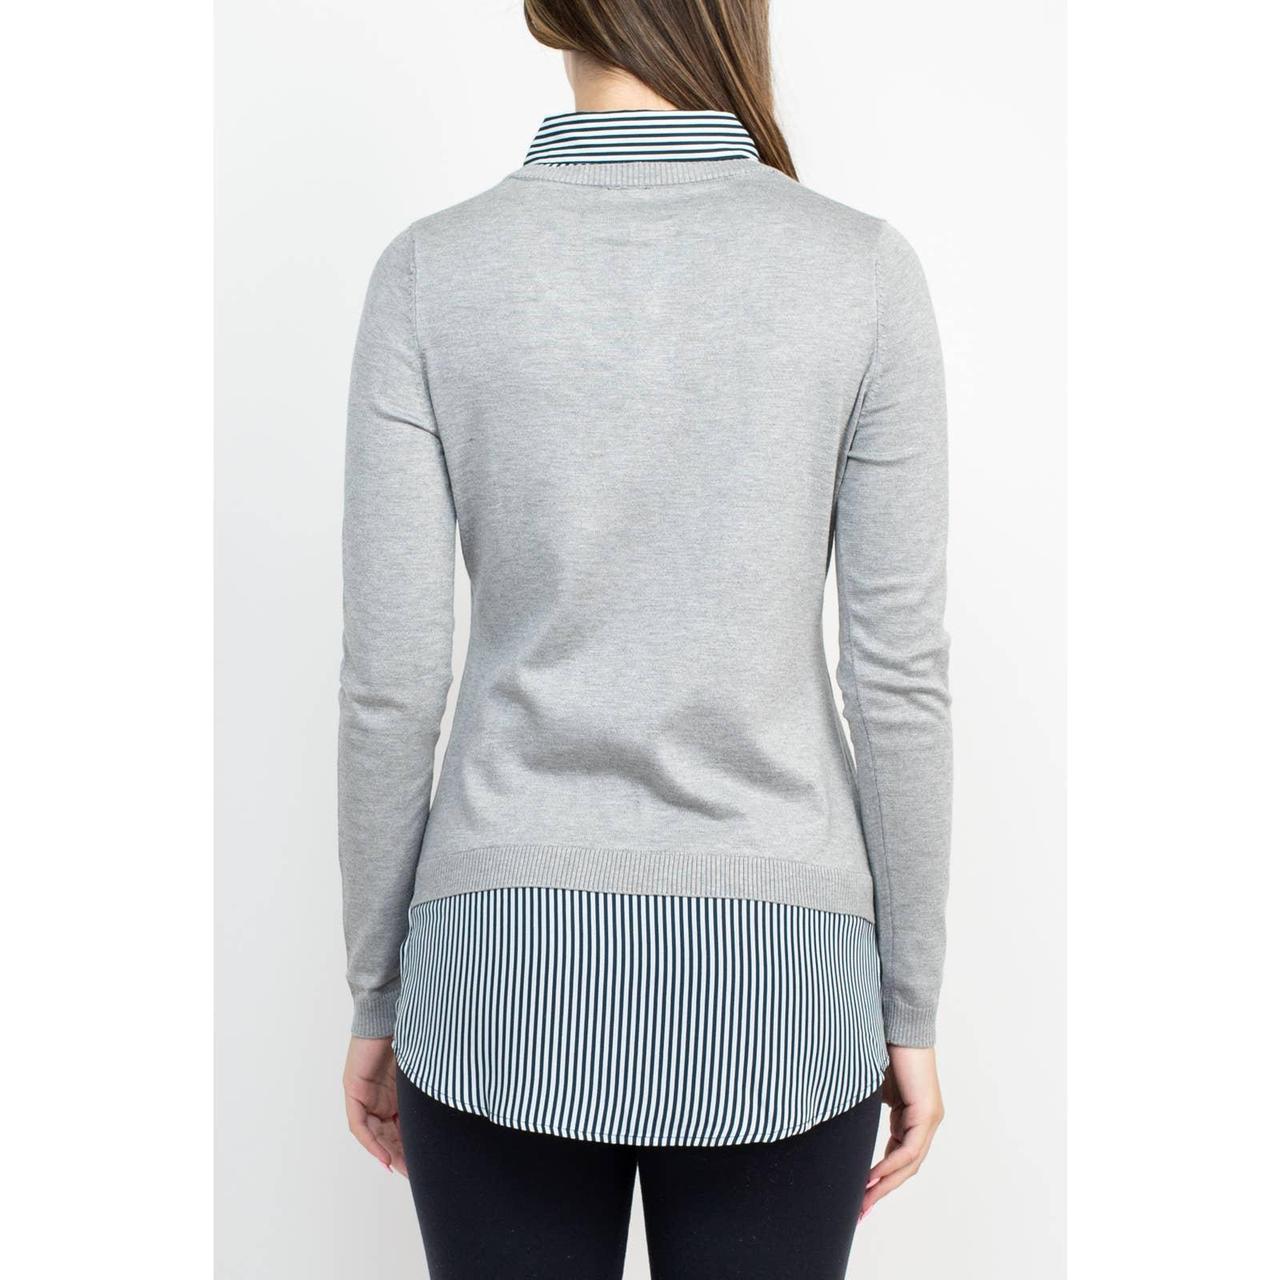 Adrianna Papell Women's Grey and White Jumper (2)